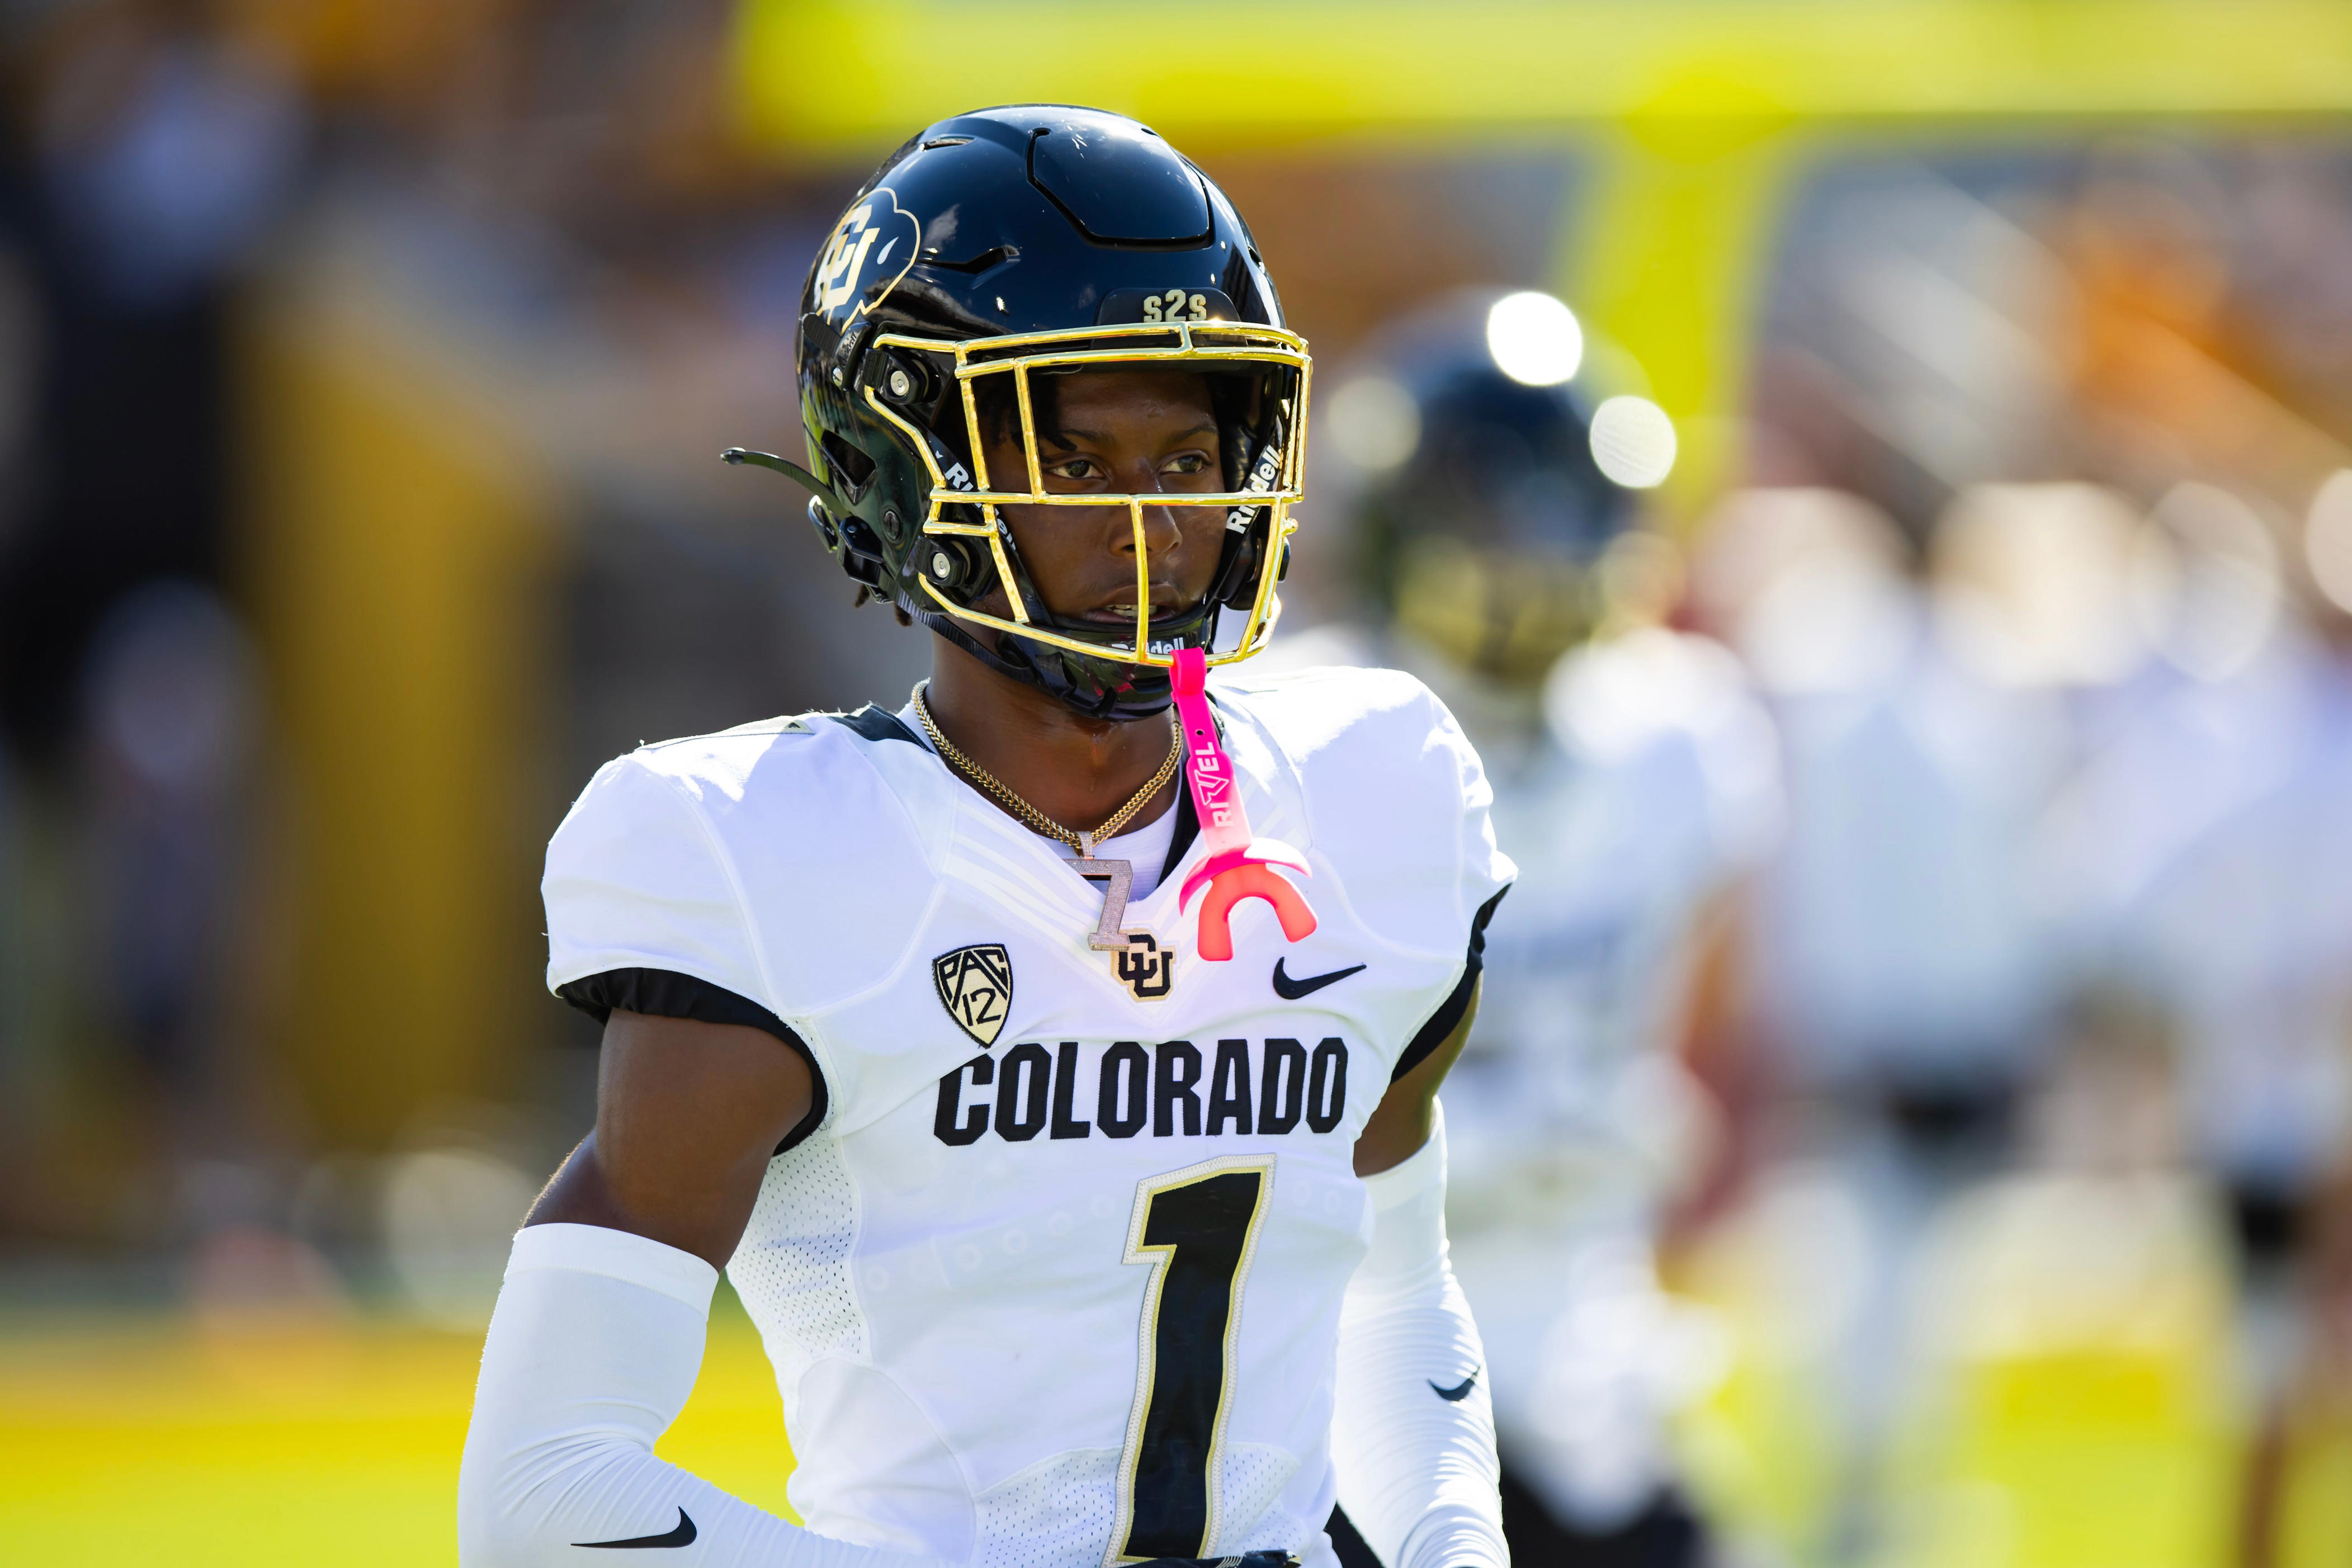 five-star recruit who signed to play for deion sanders and colorado enters transfer portal